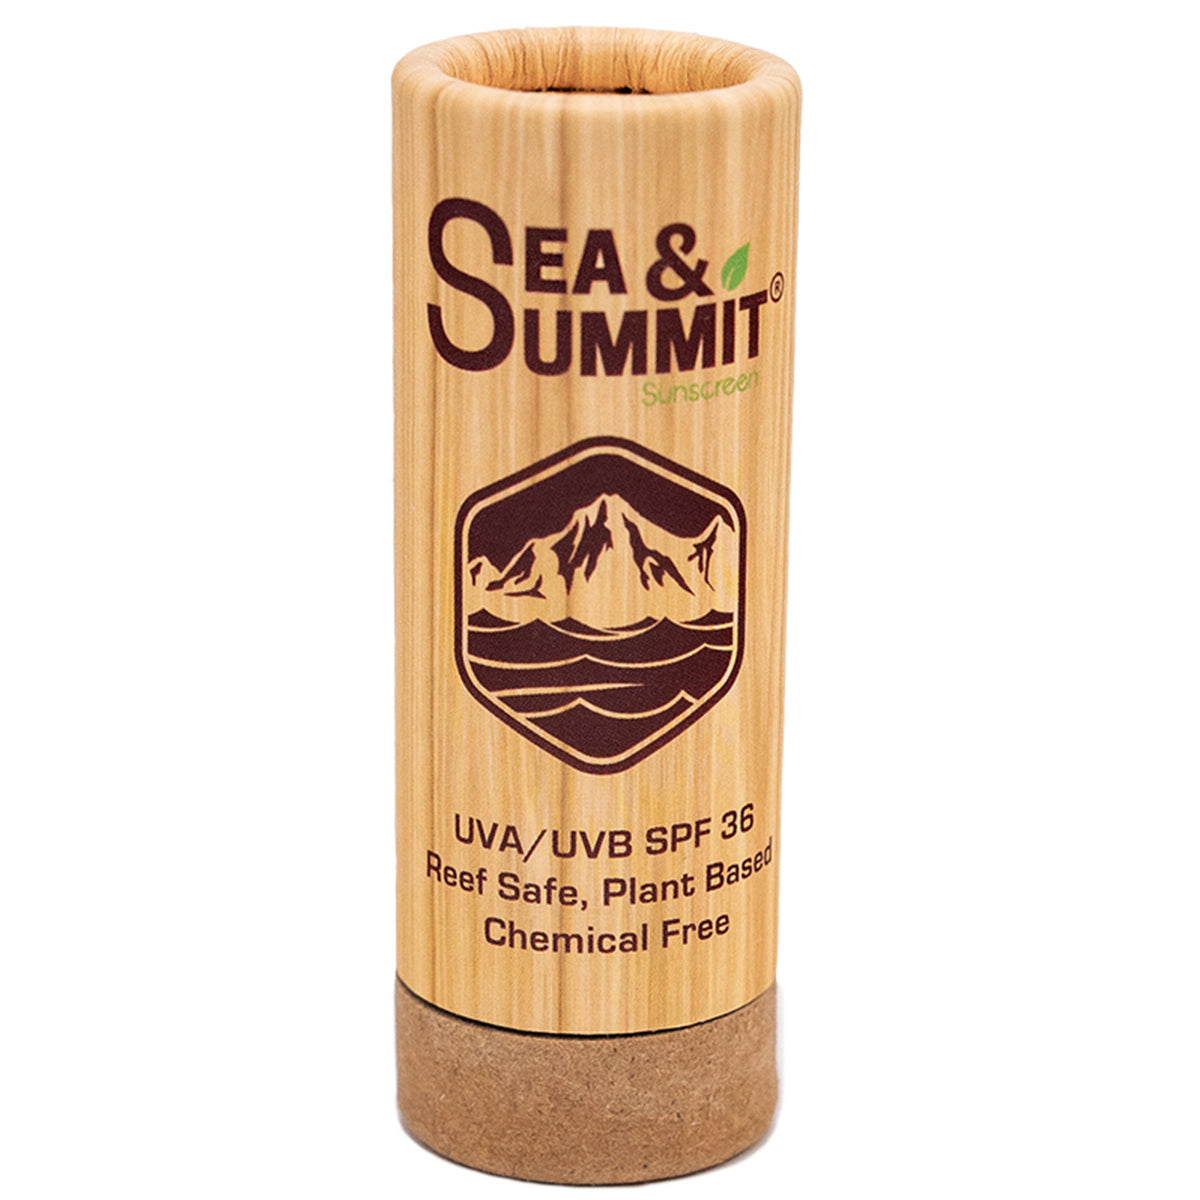 Sea & Summit's classic SPF 36 natural sunscreen face stick on a white stock background.